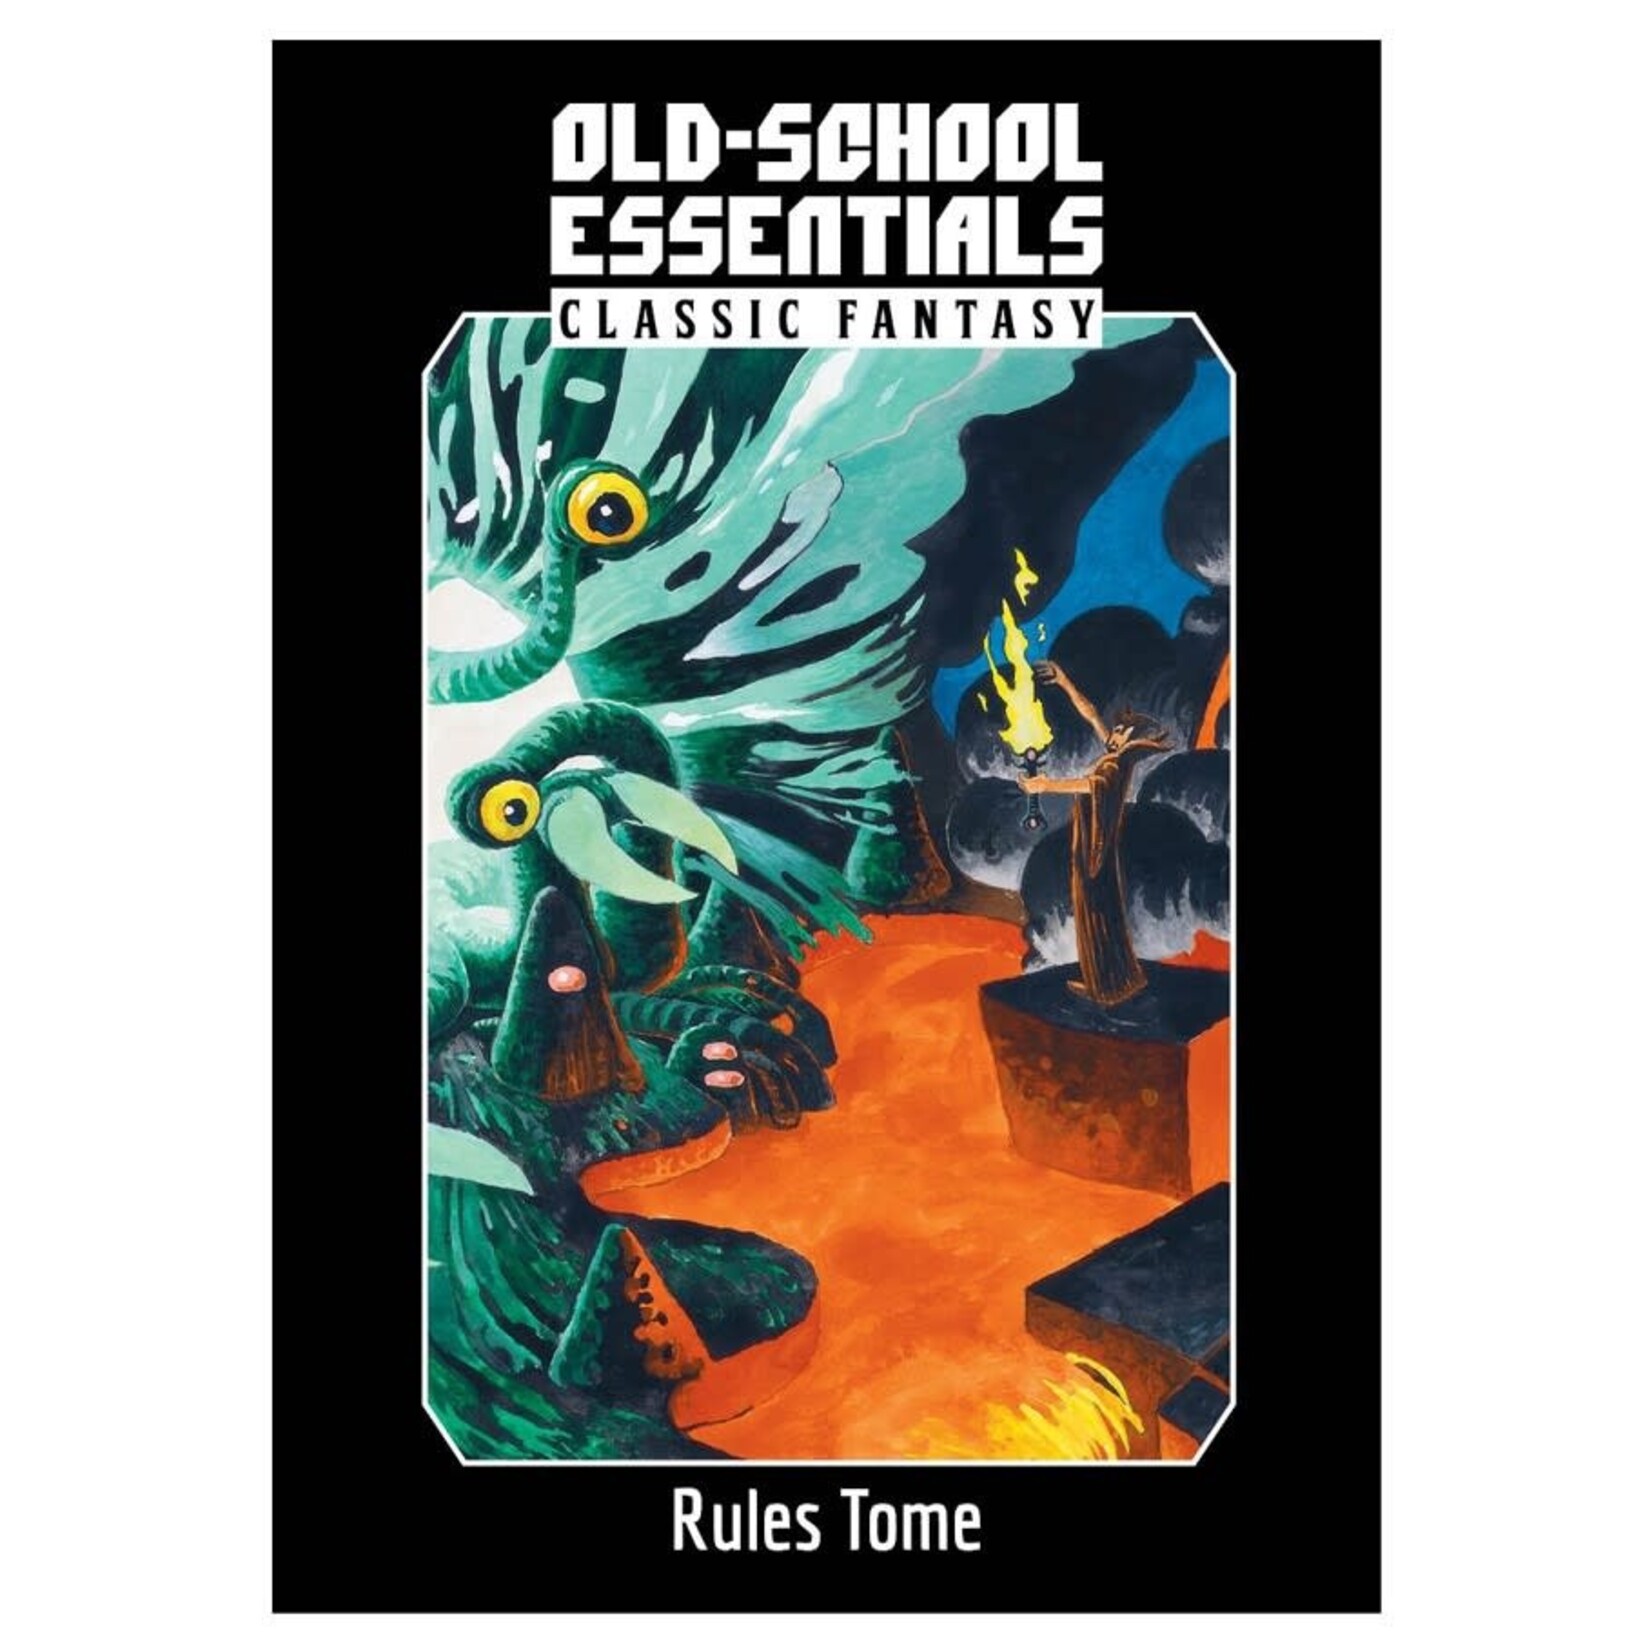 Exalted Funeral Press Old-School Essentials: Classic Fantasy Rules Tome